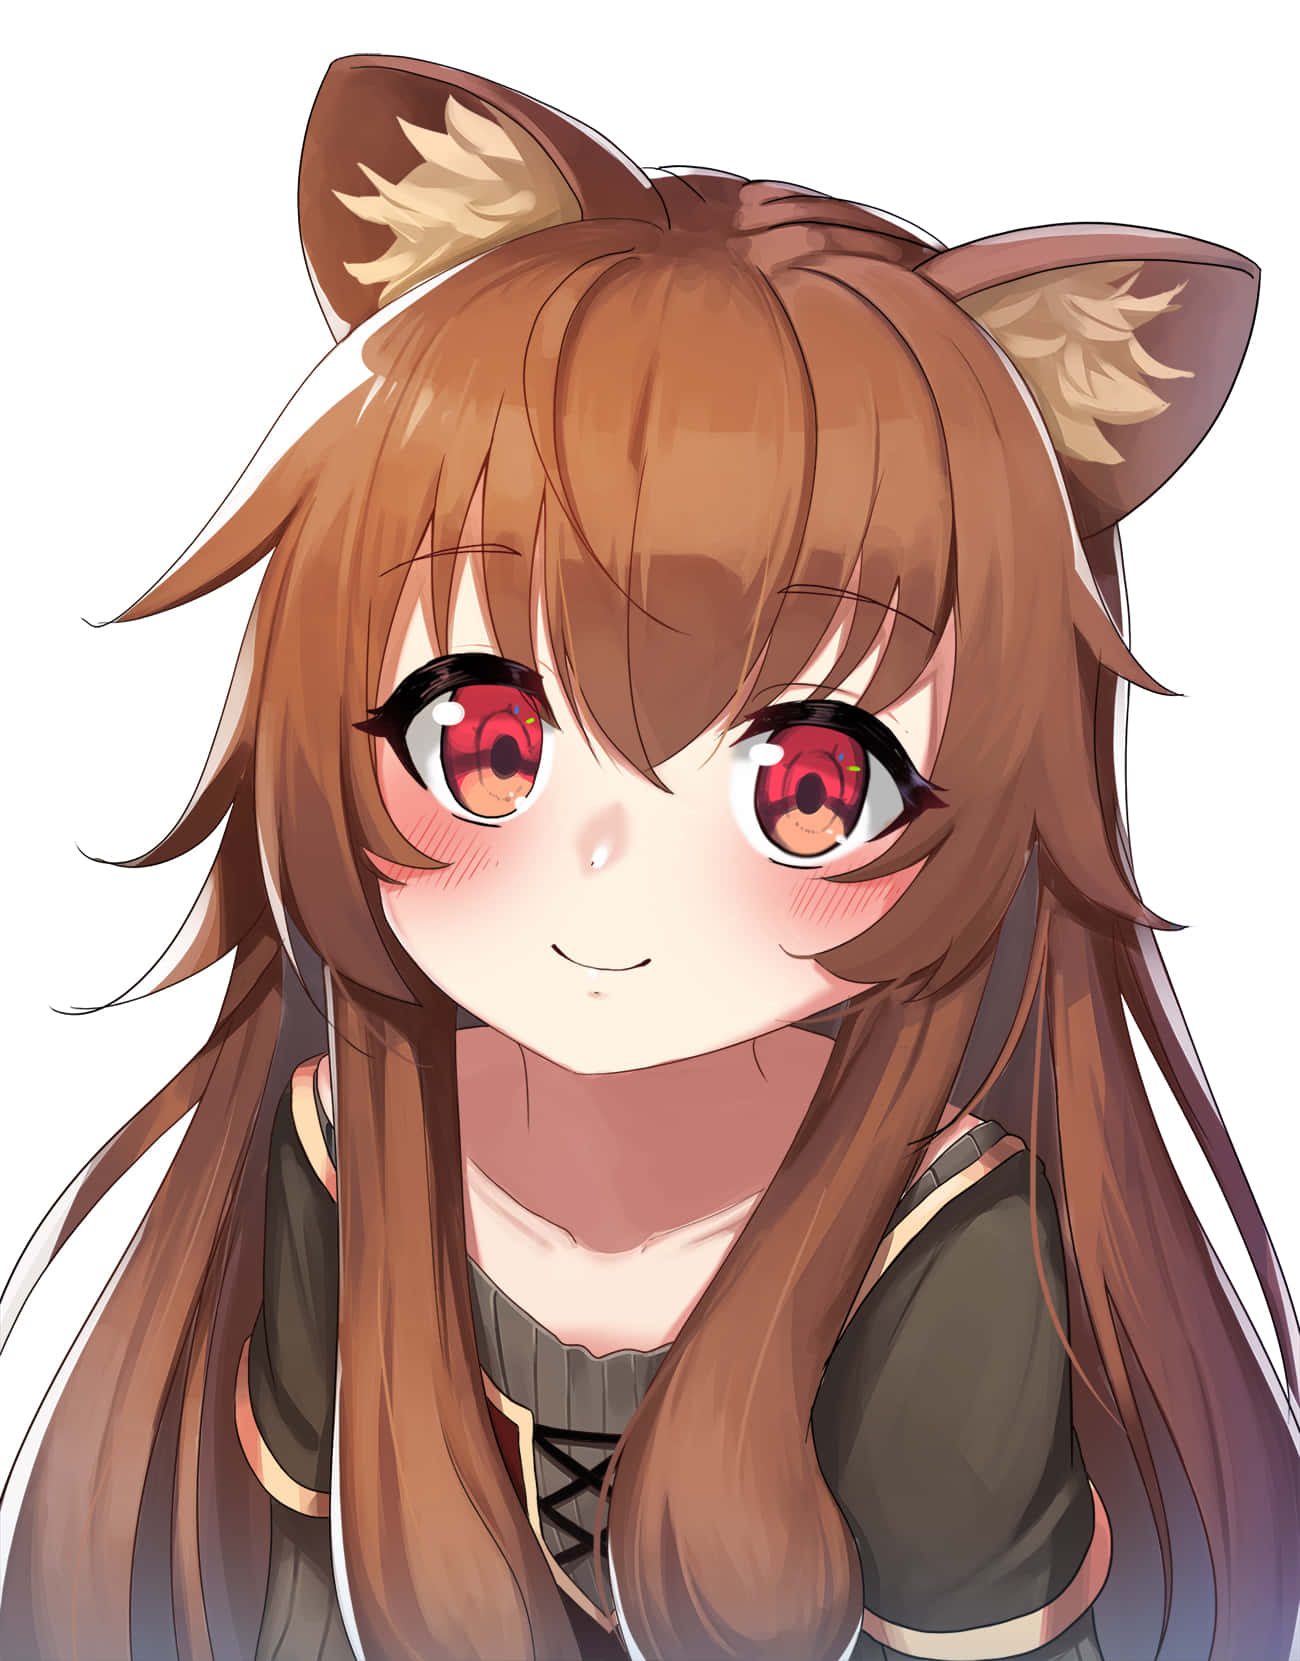 Image  Raphtalia from the Anime Series "The Rising of the Shield Hero"